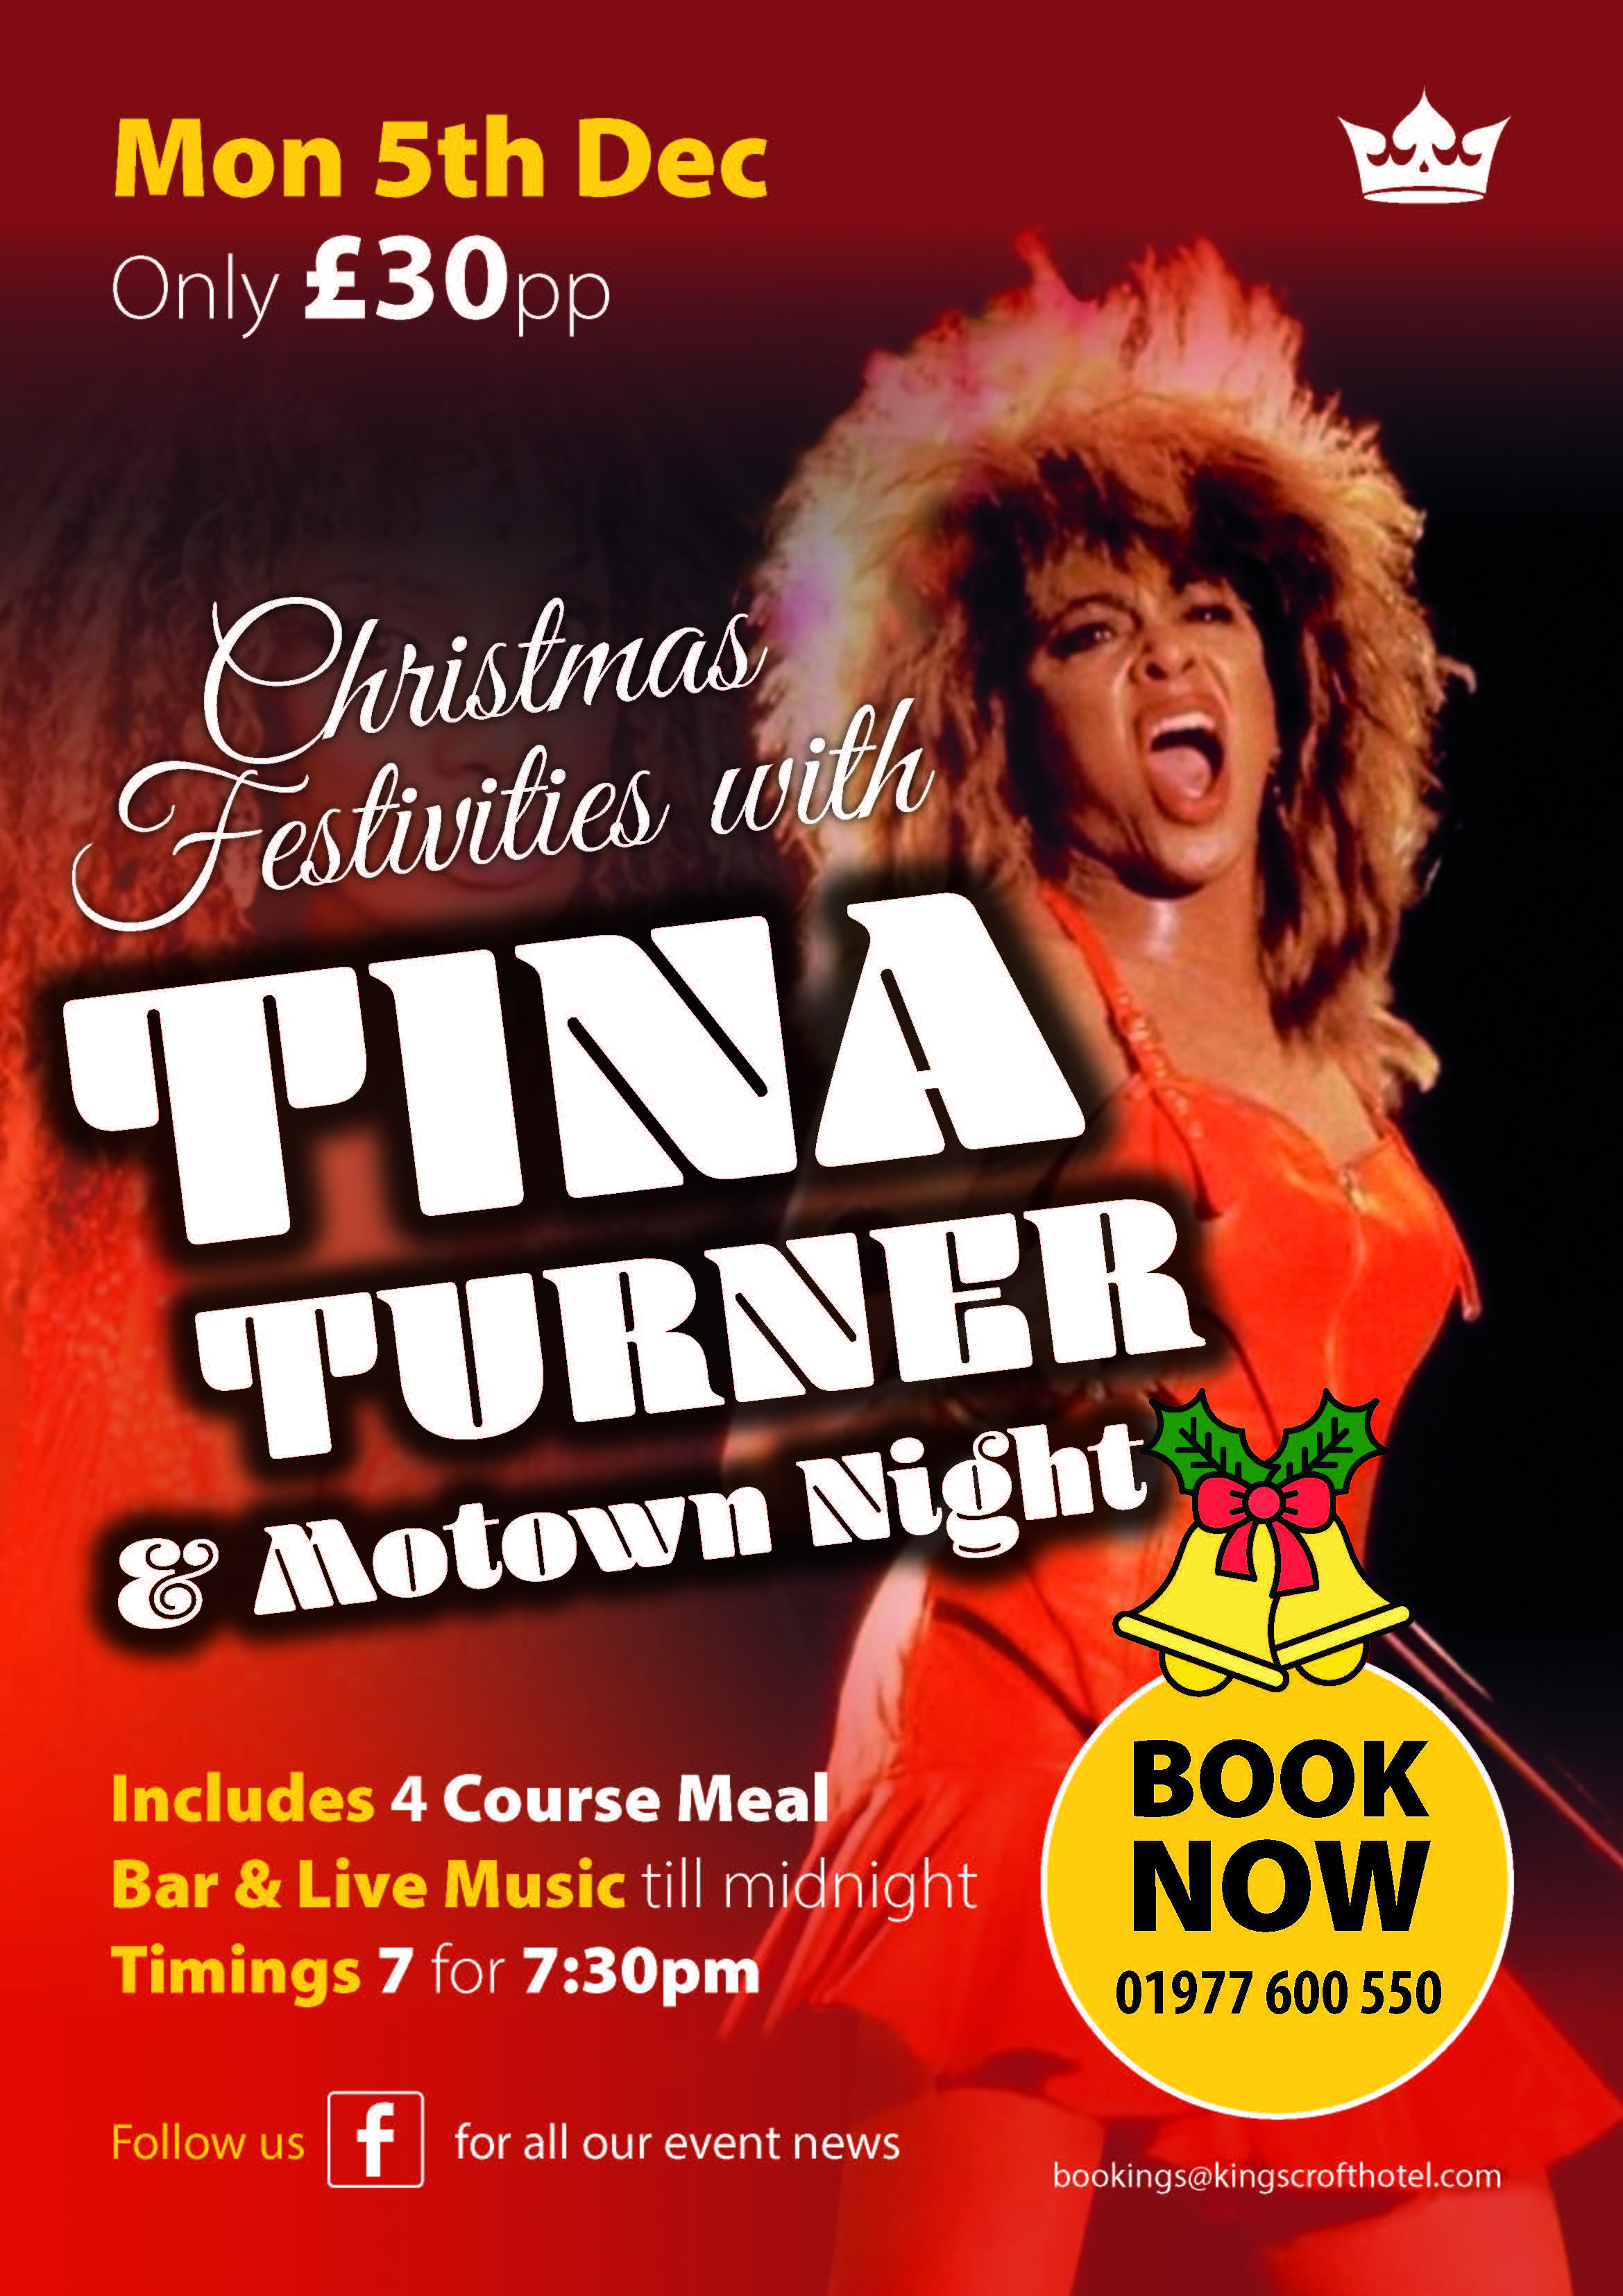 Tina Turner and Mowtown